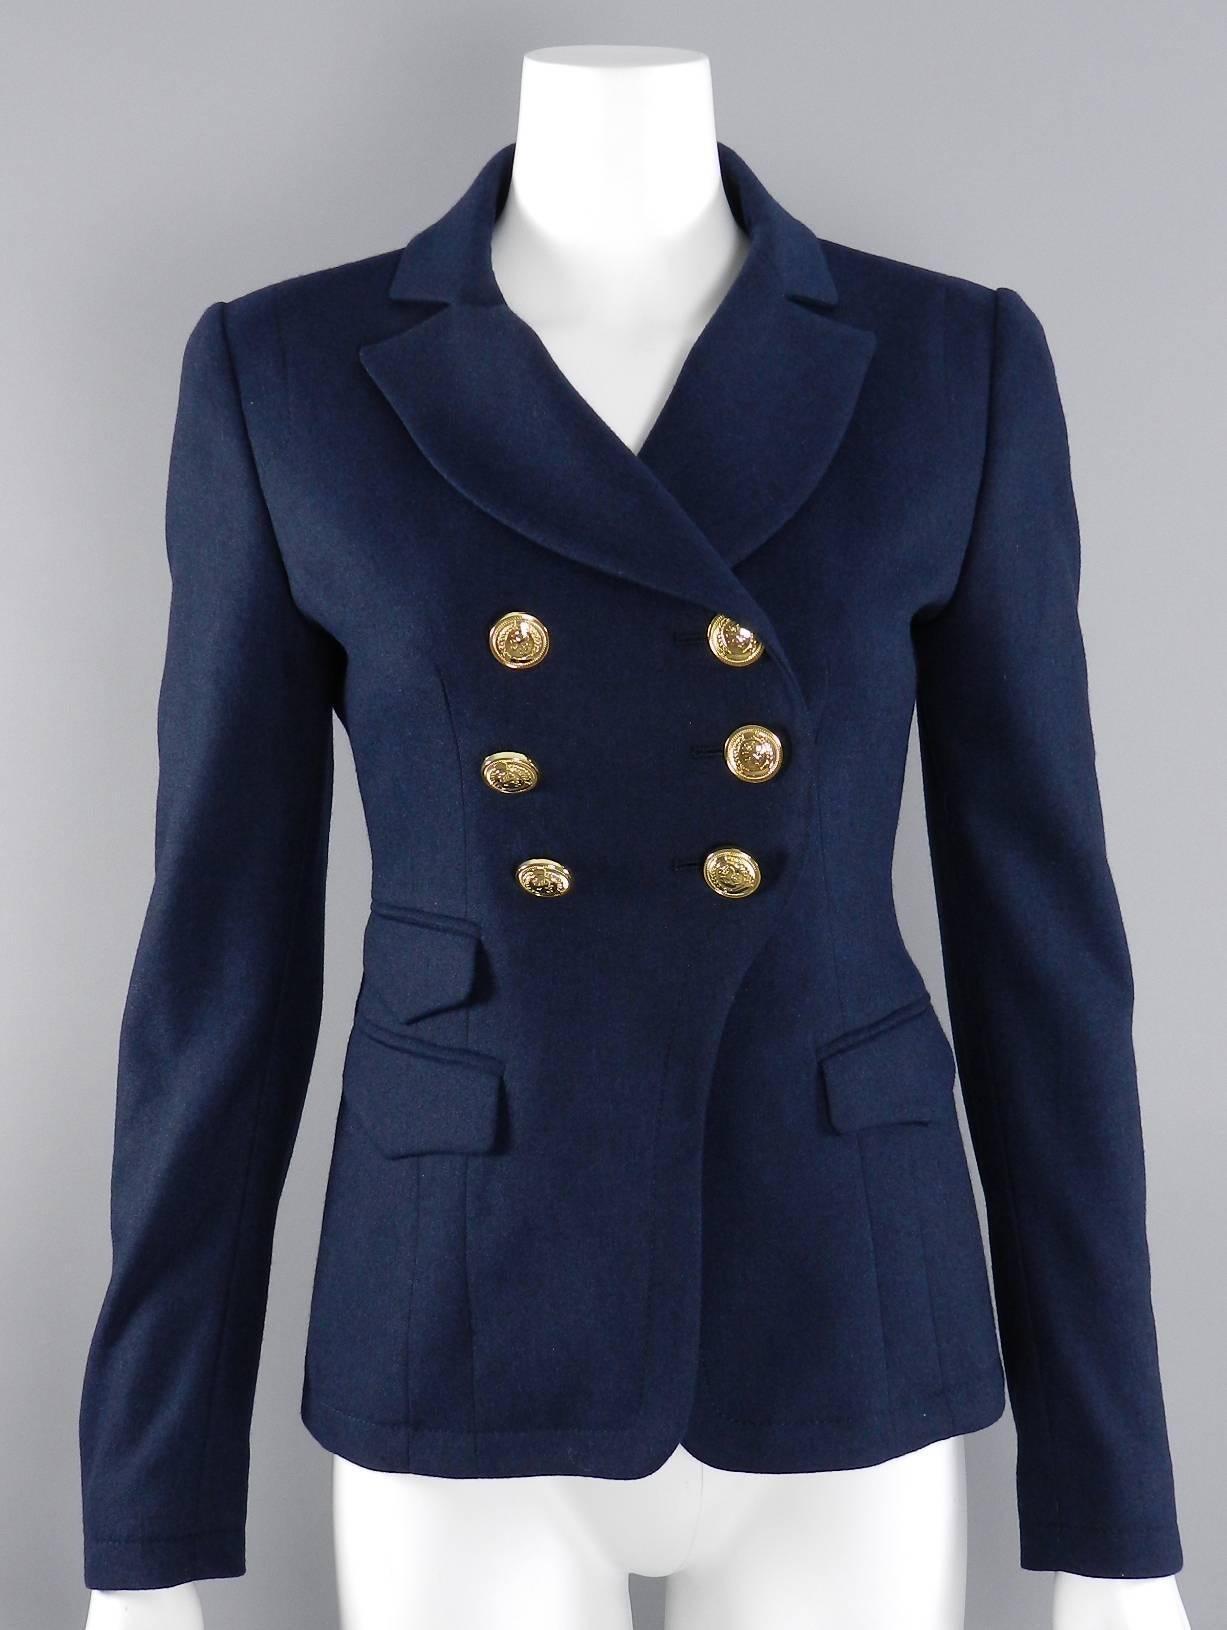 Altuzarra Navy Military Runway Jacket with Gold Buttons 4